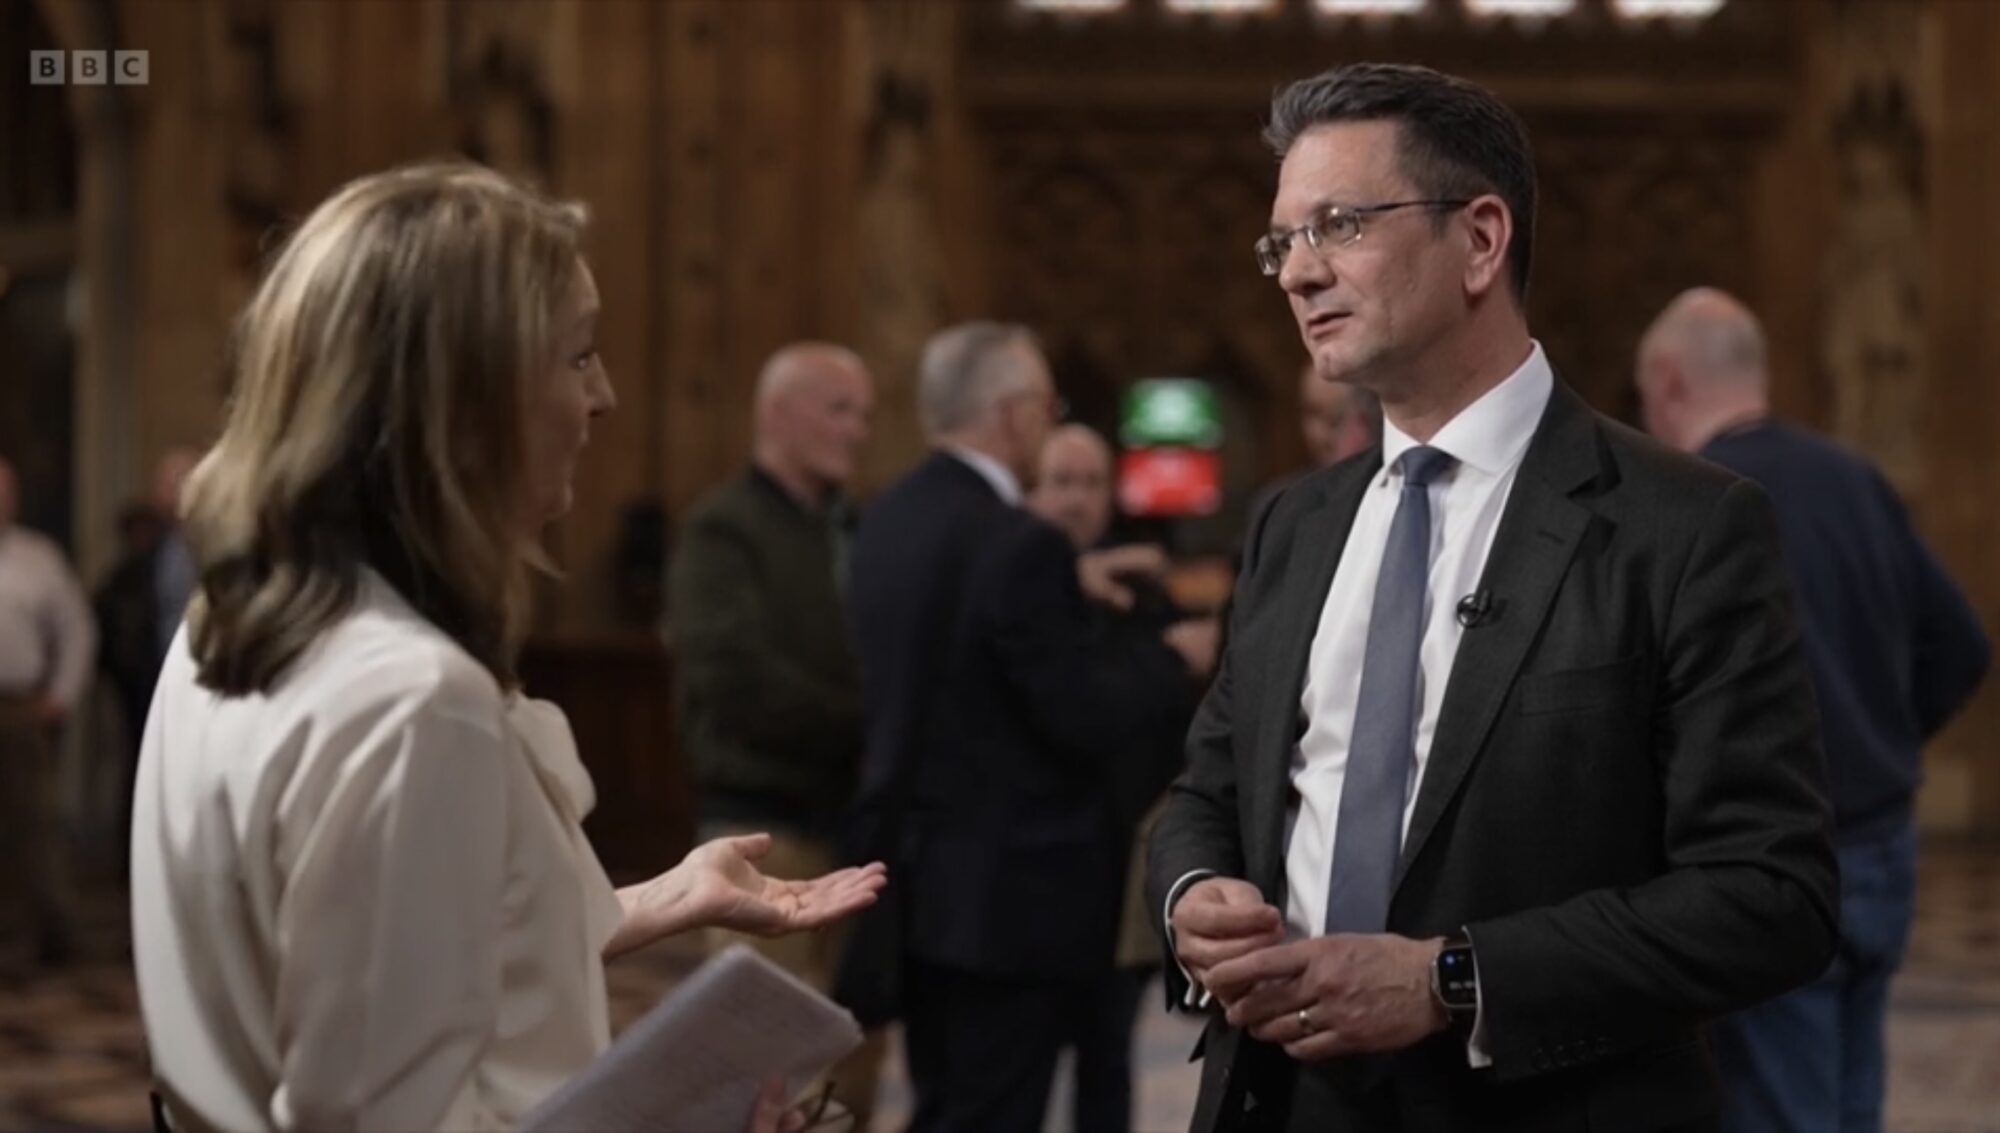 Steve Baker interviewed by BBC Newsnight’s Victoria Derbyshire on the day the General Election is announced